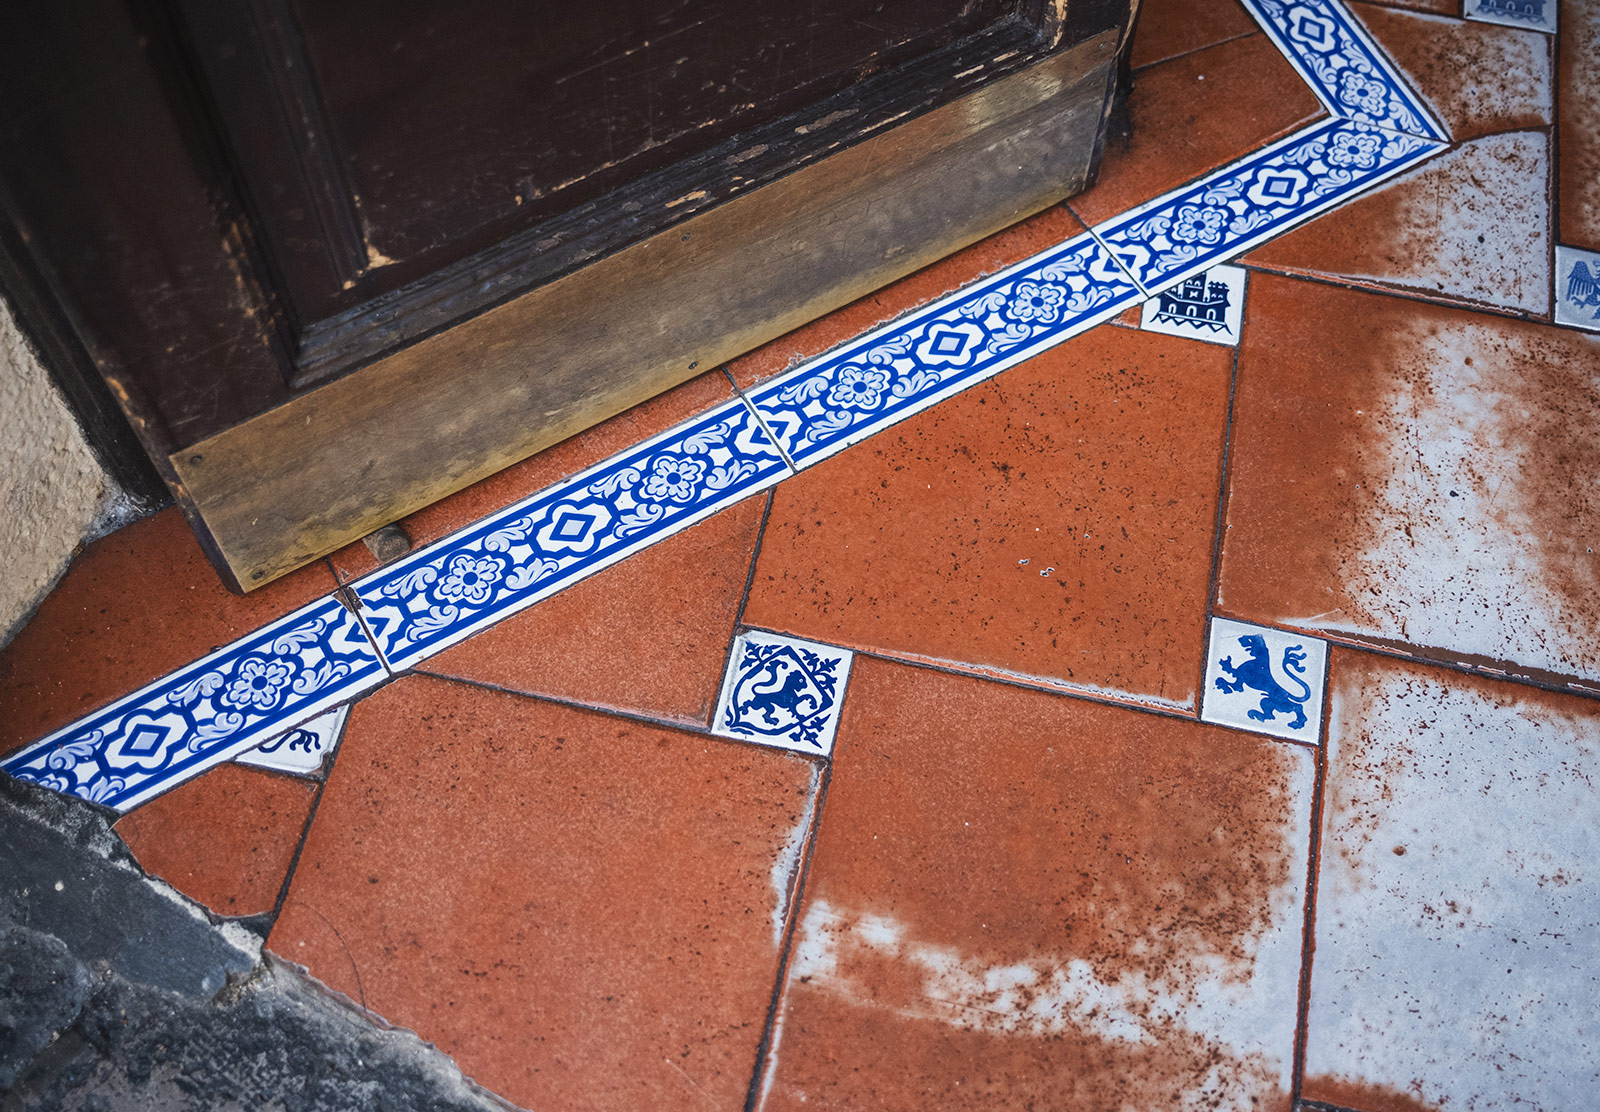 Decorative blue and white tiles